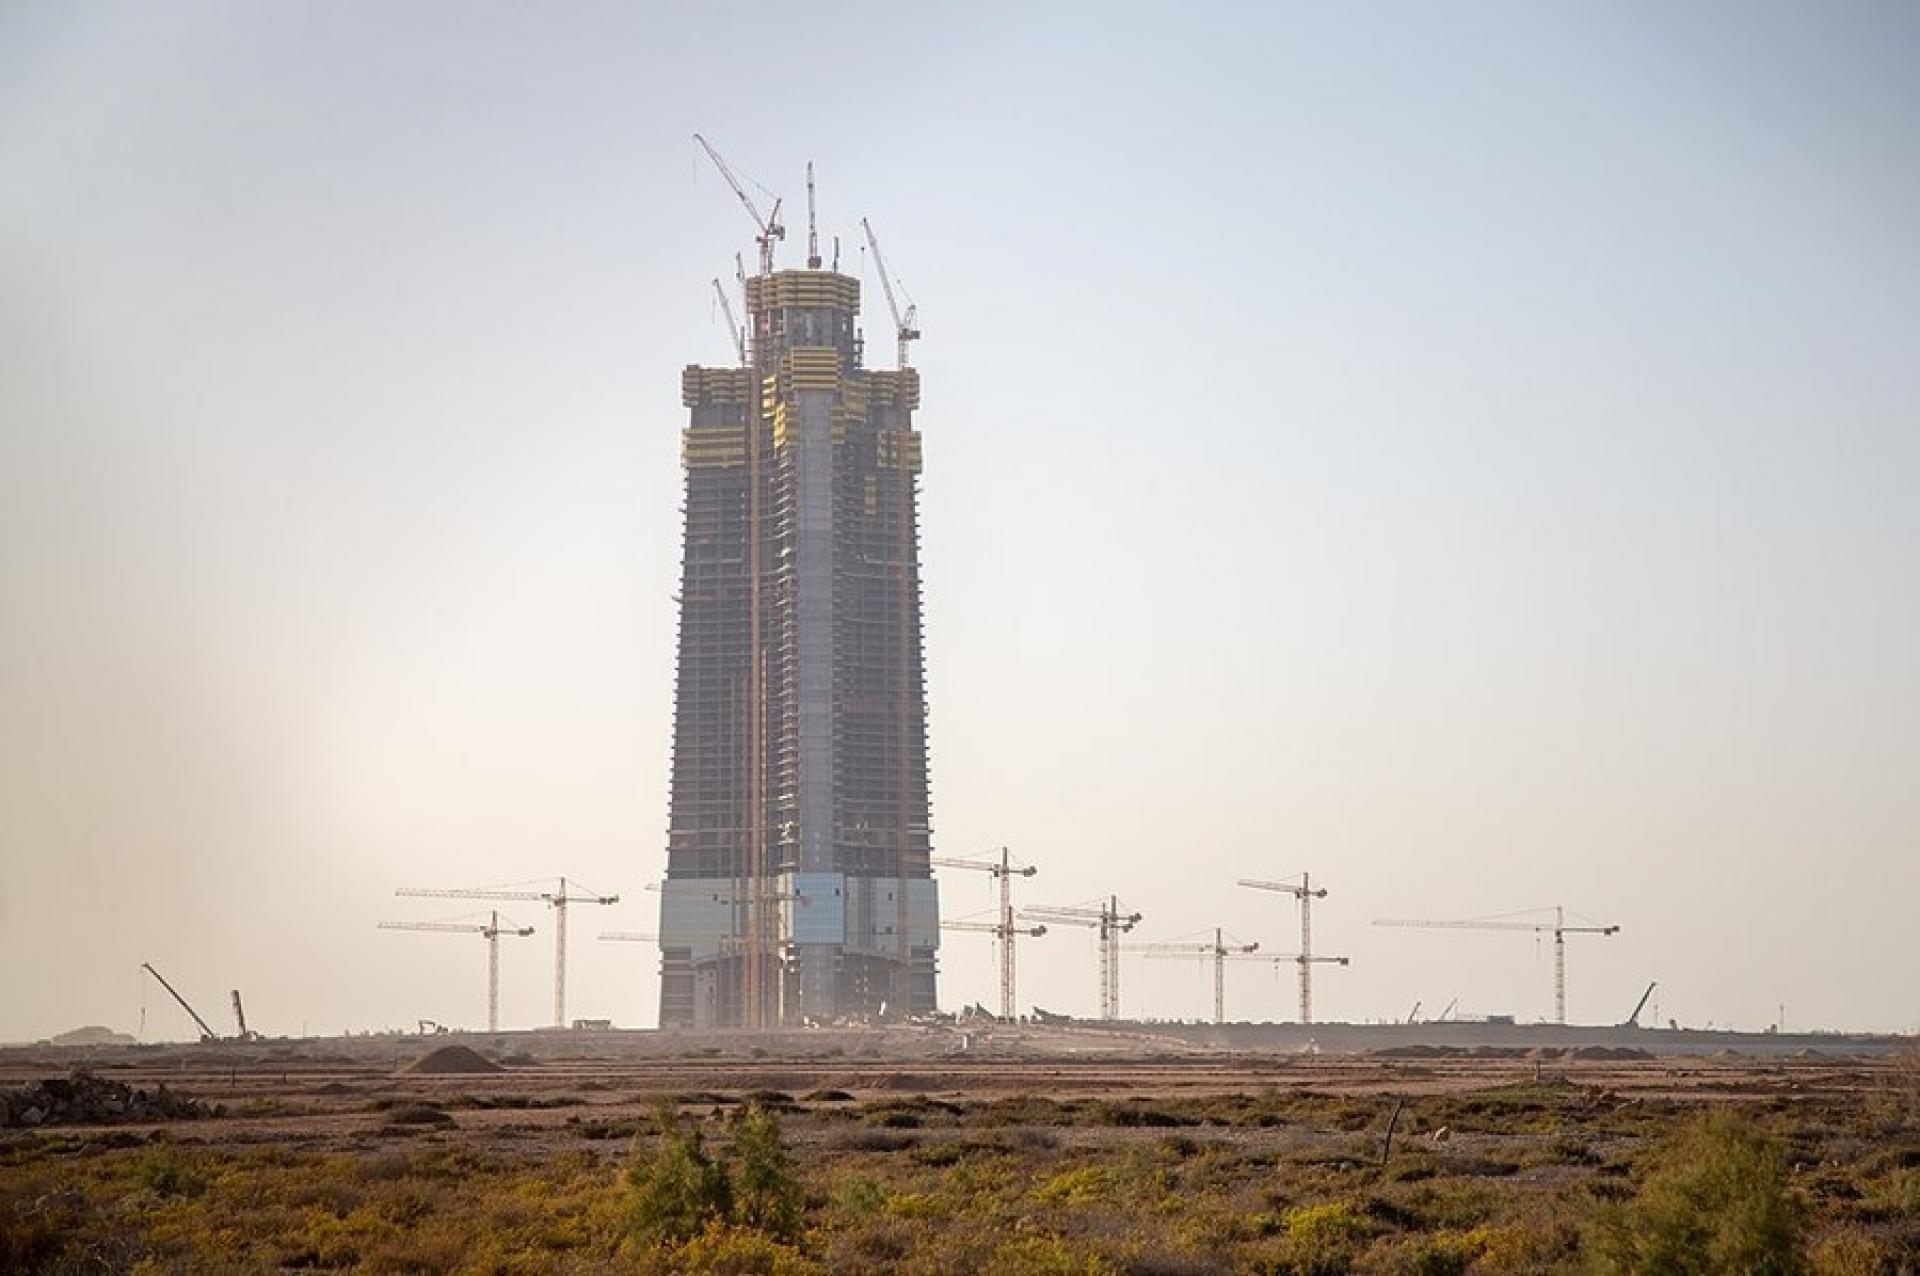 Jeddah tower (render) and during the construction 2019. | Photo via Vikas